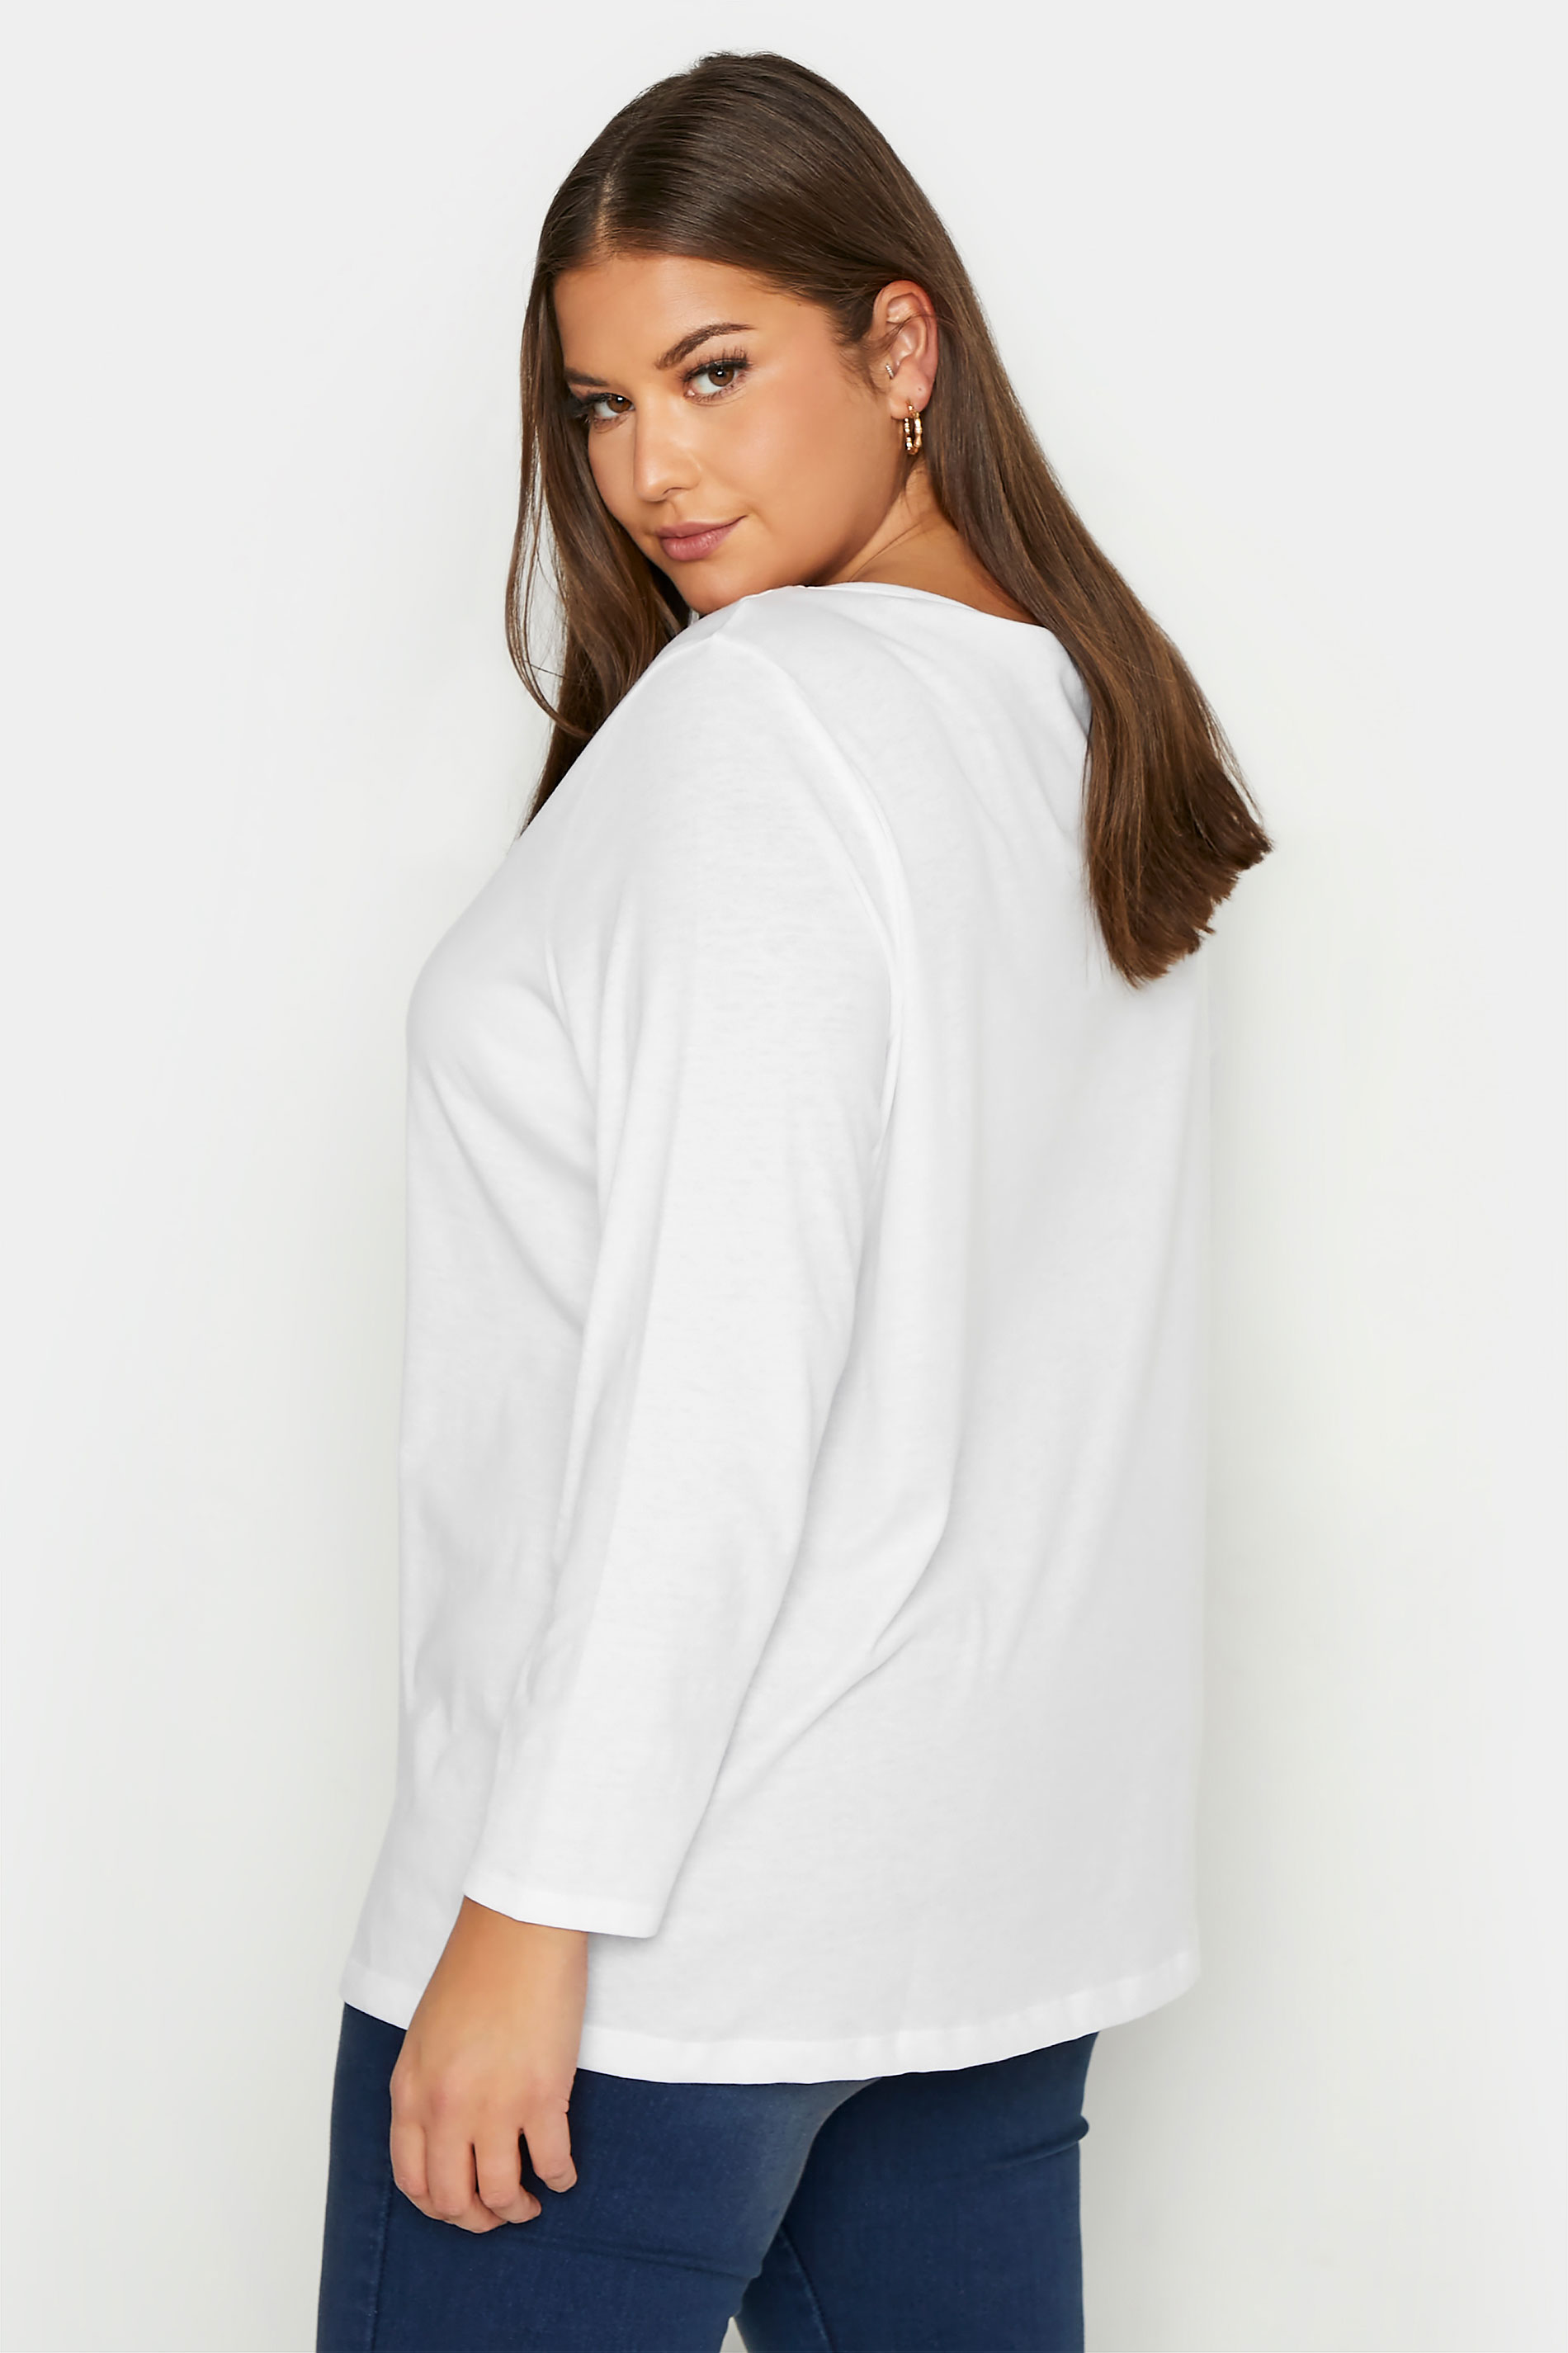 Grande taille  Tops Grande taille  Tops à Manches Longues | T-Shirt Blanc Manches Longues en Jersey - FZ03379